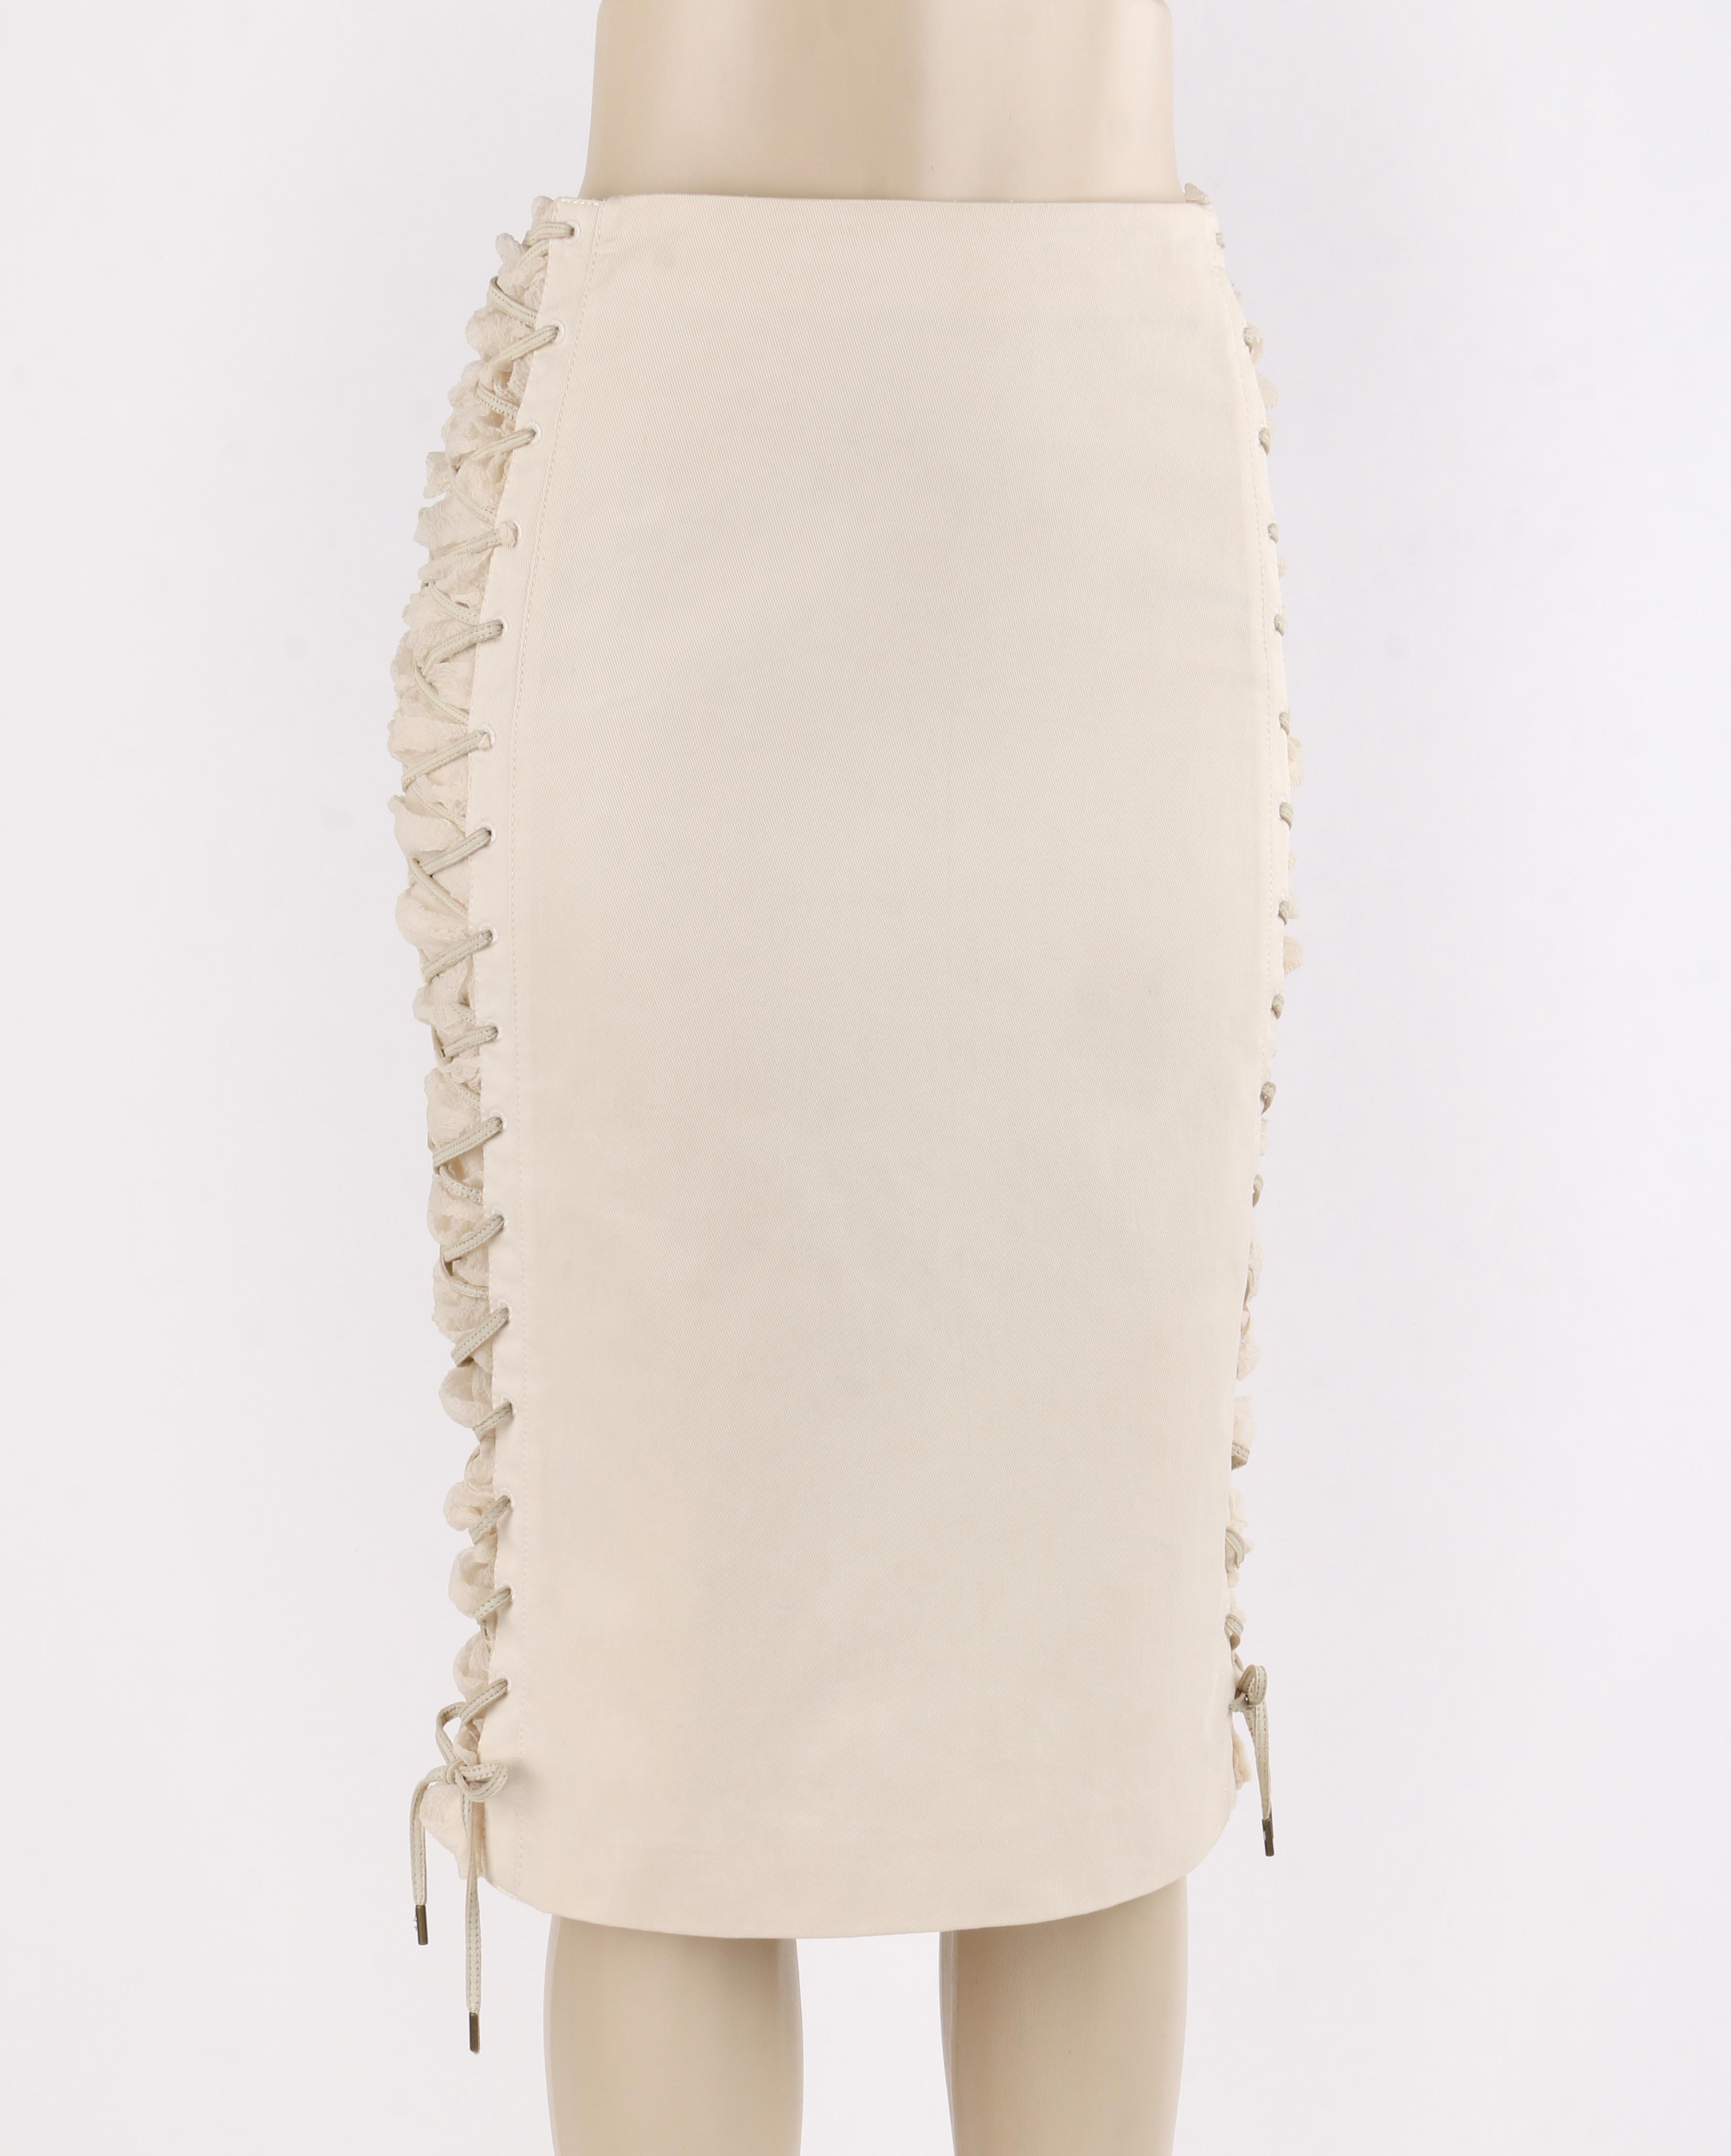 ALEXANDER McQUEEN A/W 2002 “Supercalifragilistic” Silk Lace Up Pencil Skirt
 
Brand / Manufacturer: Alexander McQueen 
Collection: Autumn / Winter 2002; “Supercalifragilistic” 
Style: Pencil skirt
Color(s): Shades of off white, beige and cream.